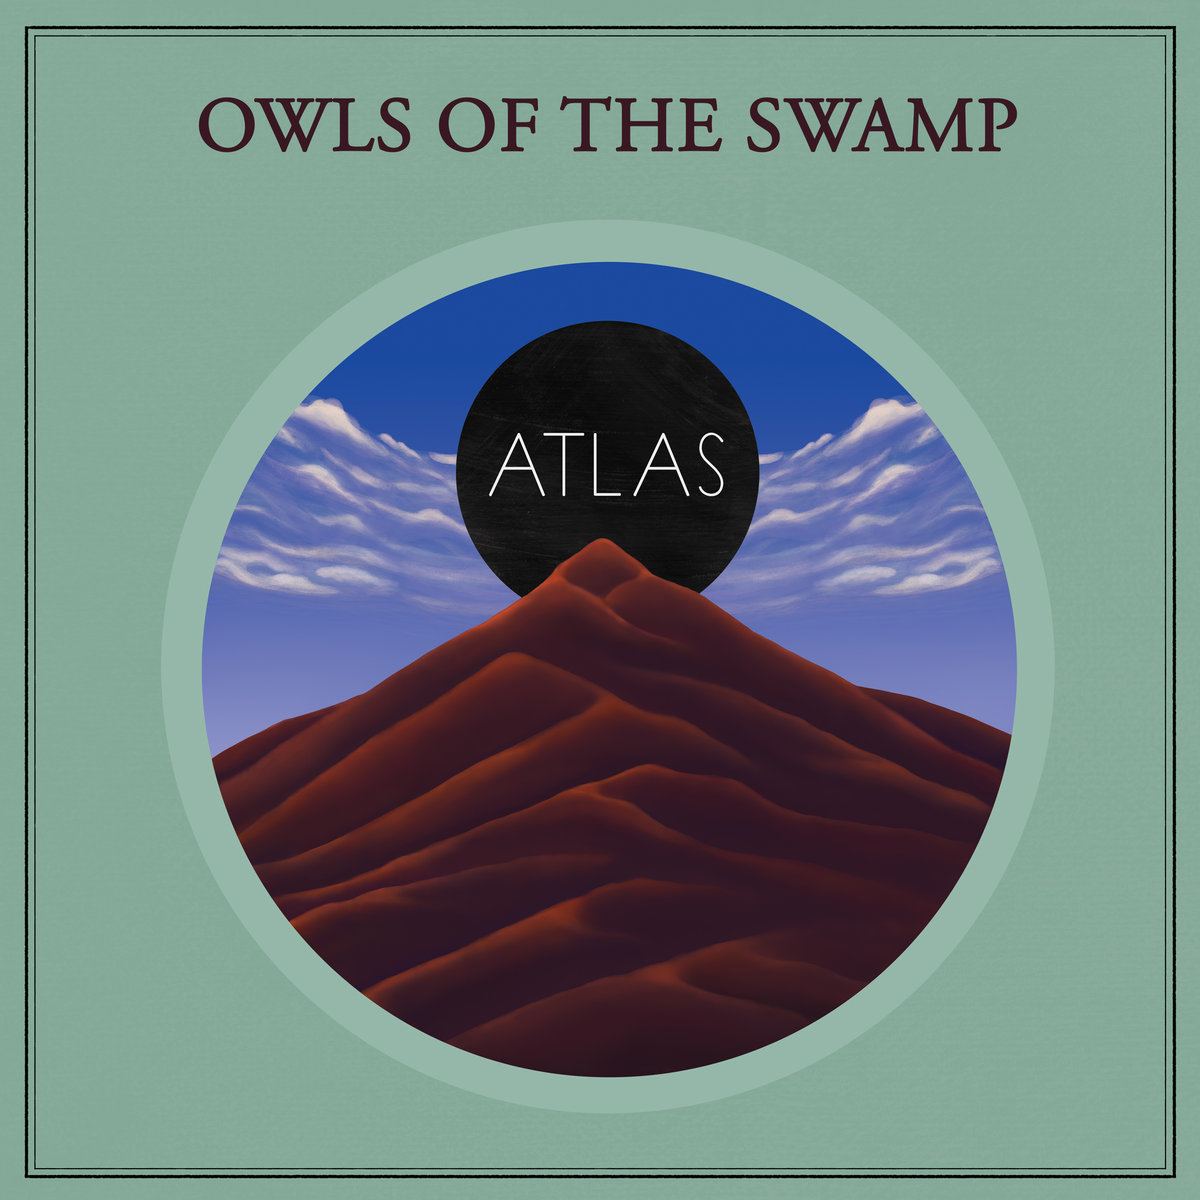 Owls of the Swamp – Atlas